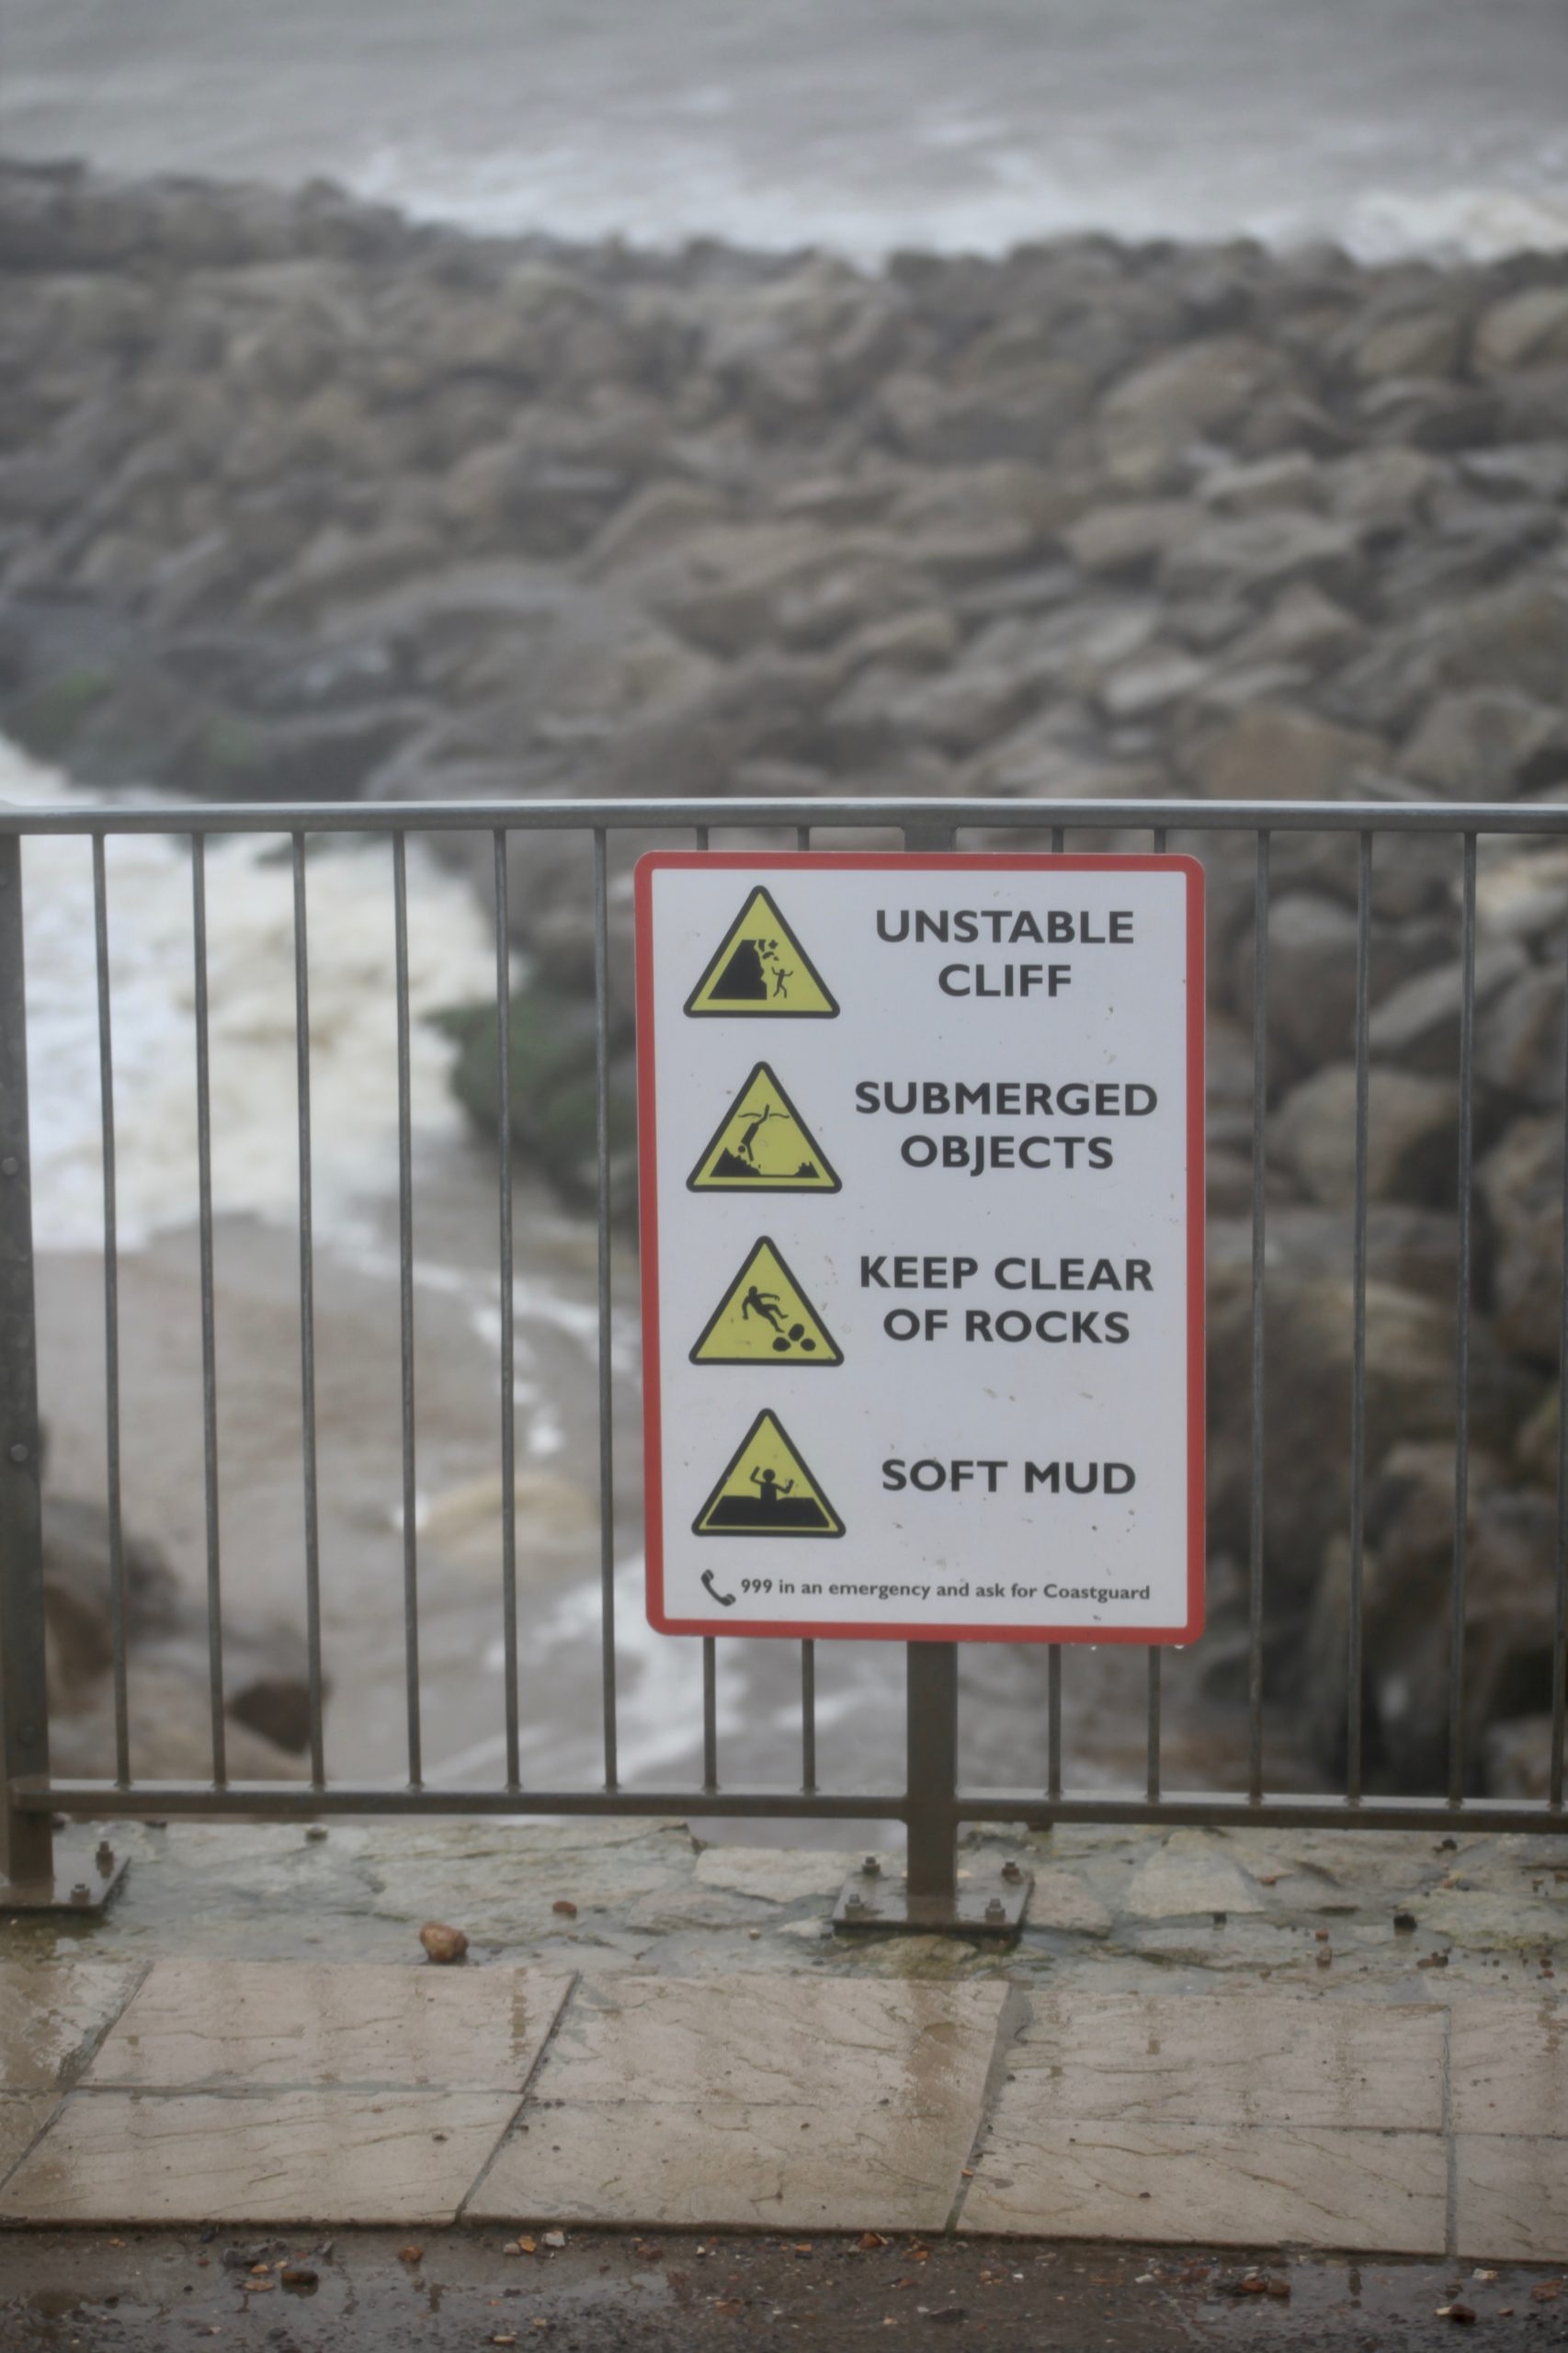 Warnings of Unstable Cliff etc